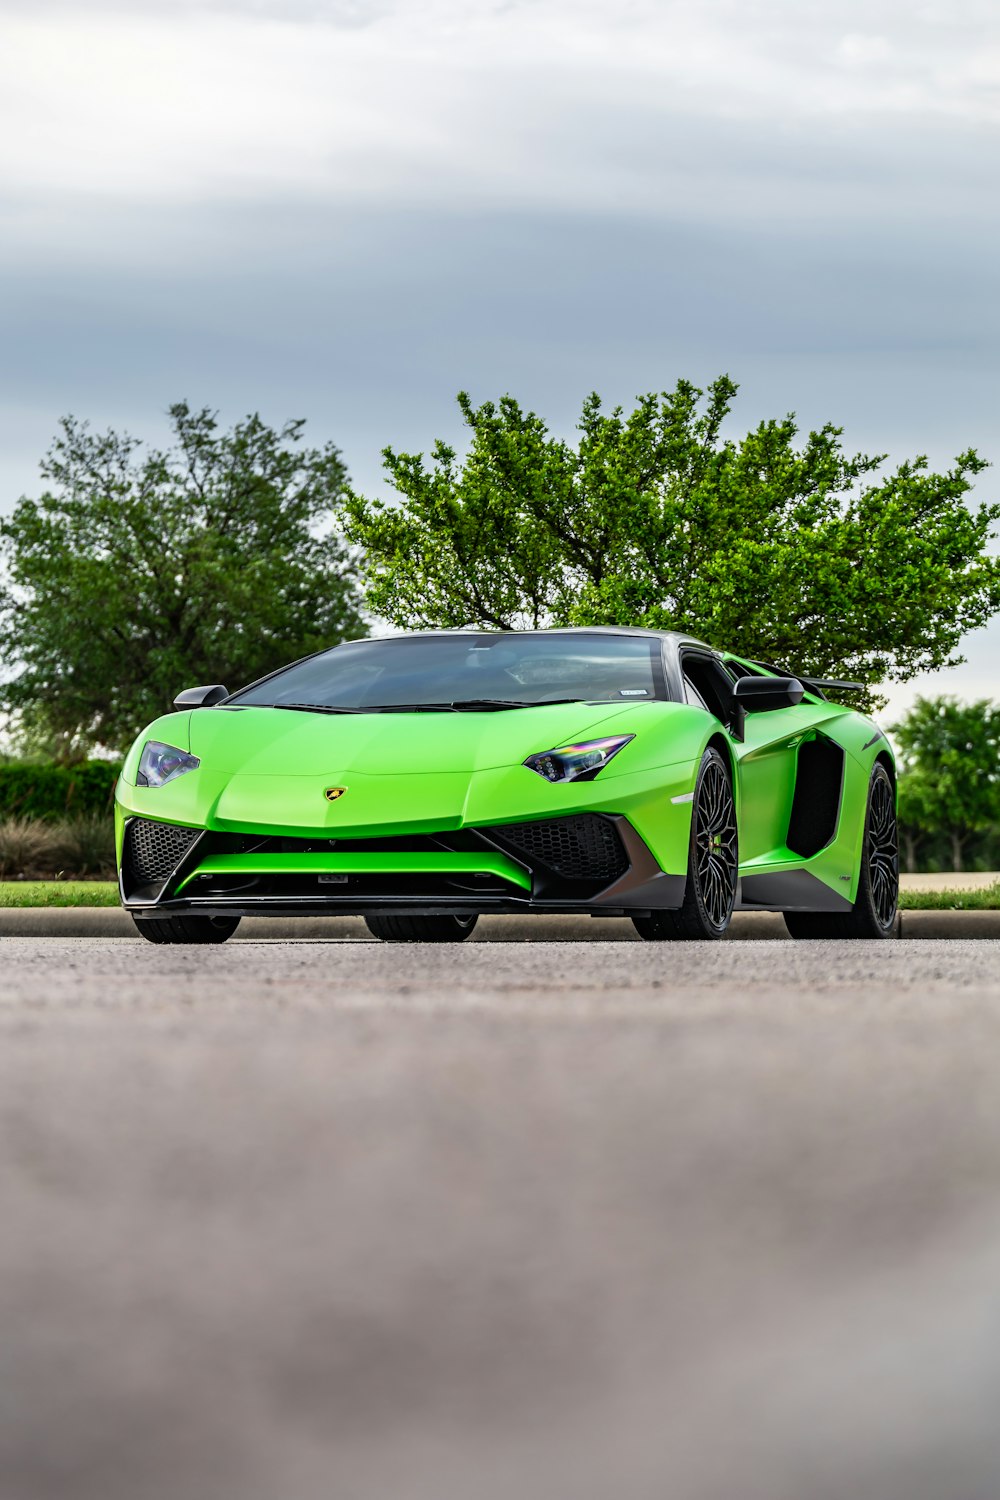 Green Lamborghini Pictures | Download Free Images on Unsplash